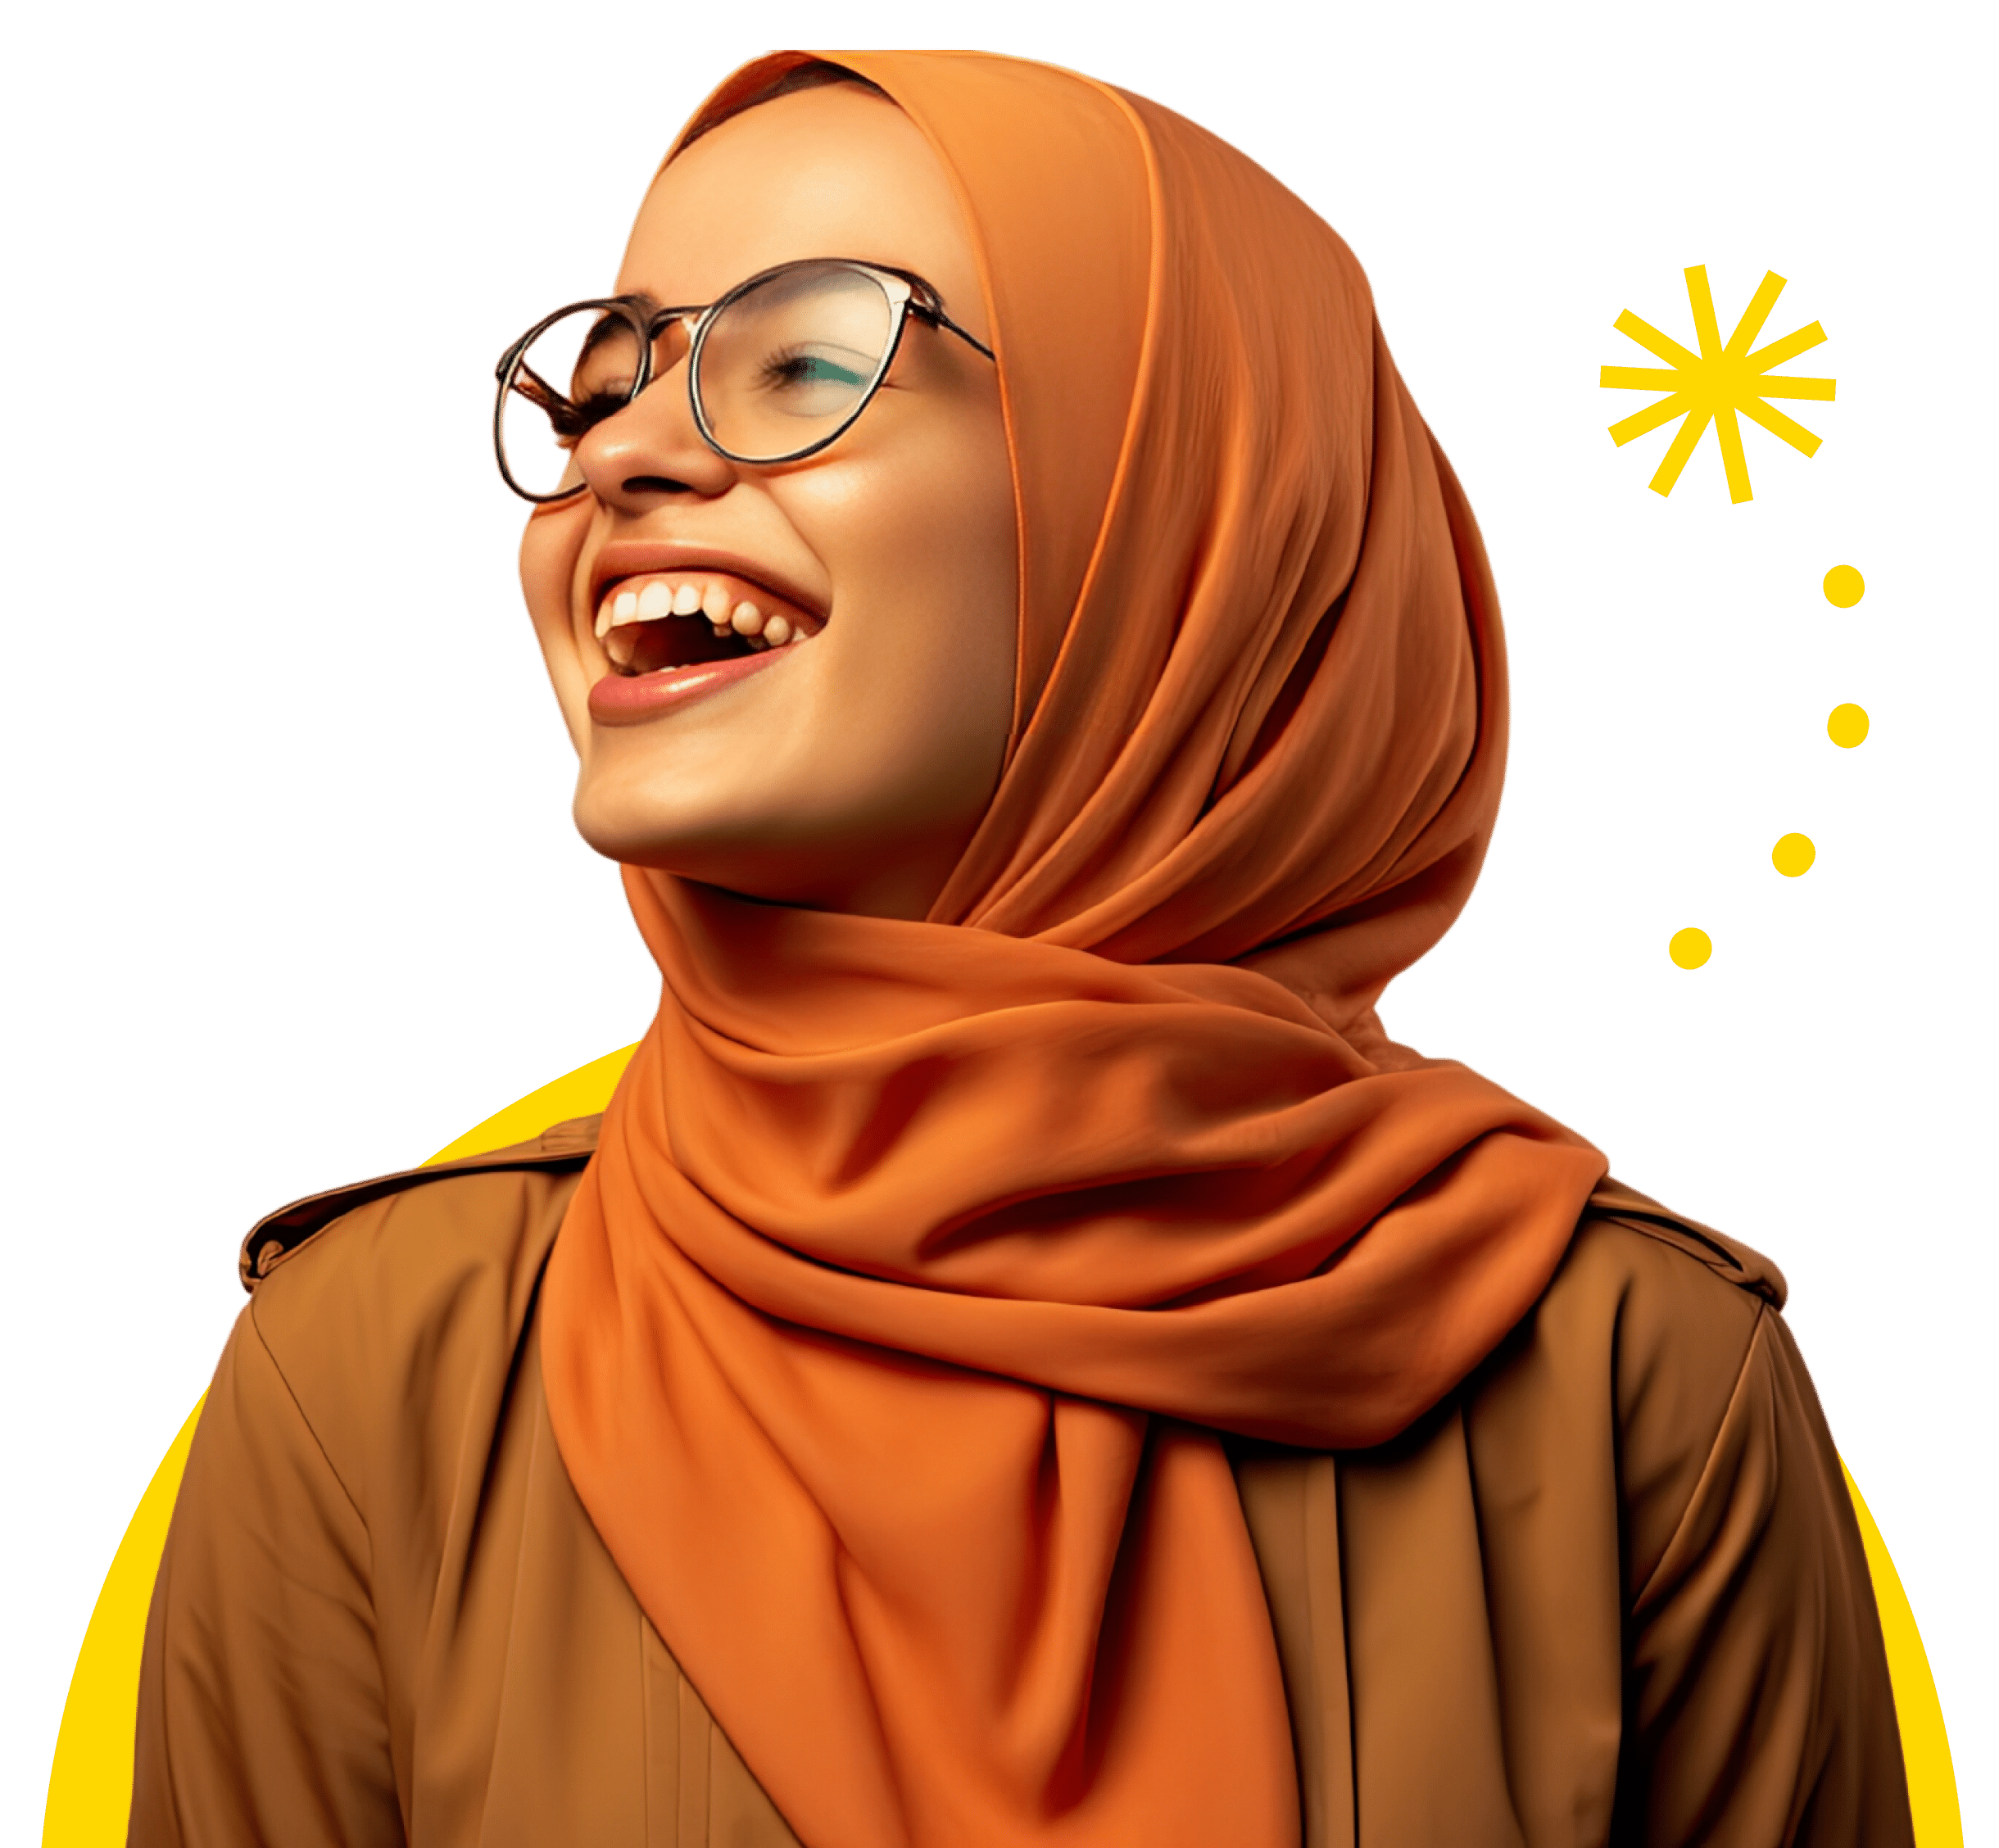 Muslim woman wearing an orange hijab and glasses looking to the top left smiling with yellow graphics in the background